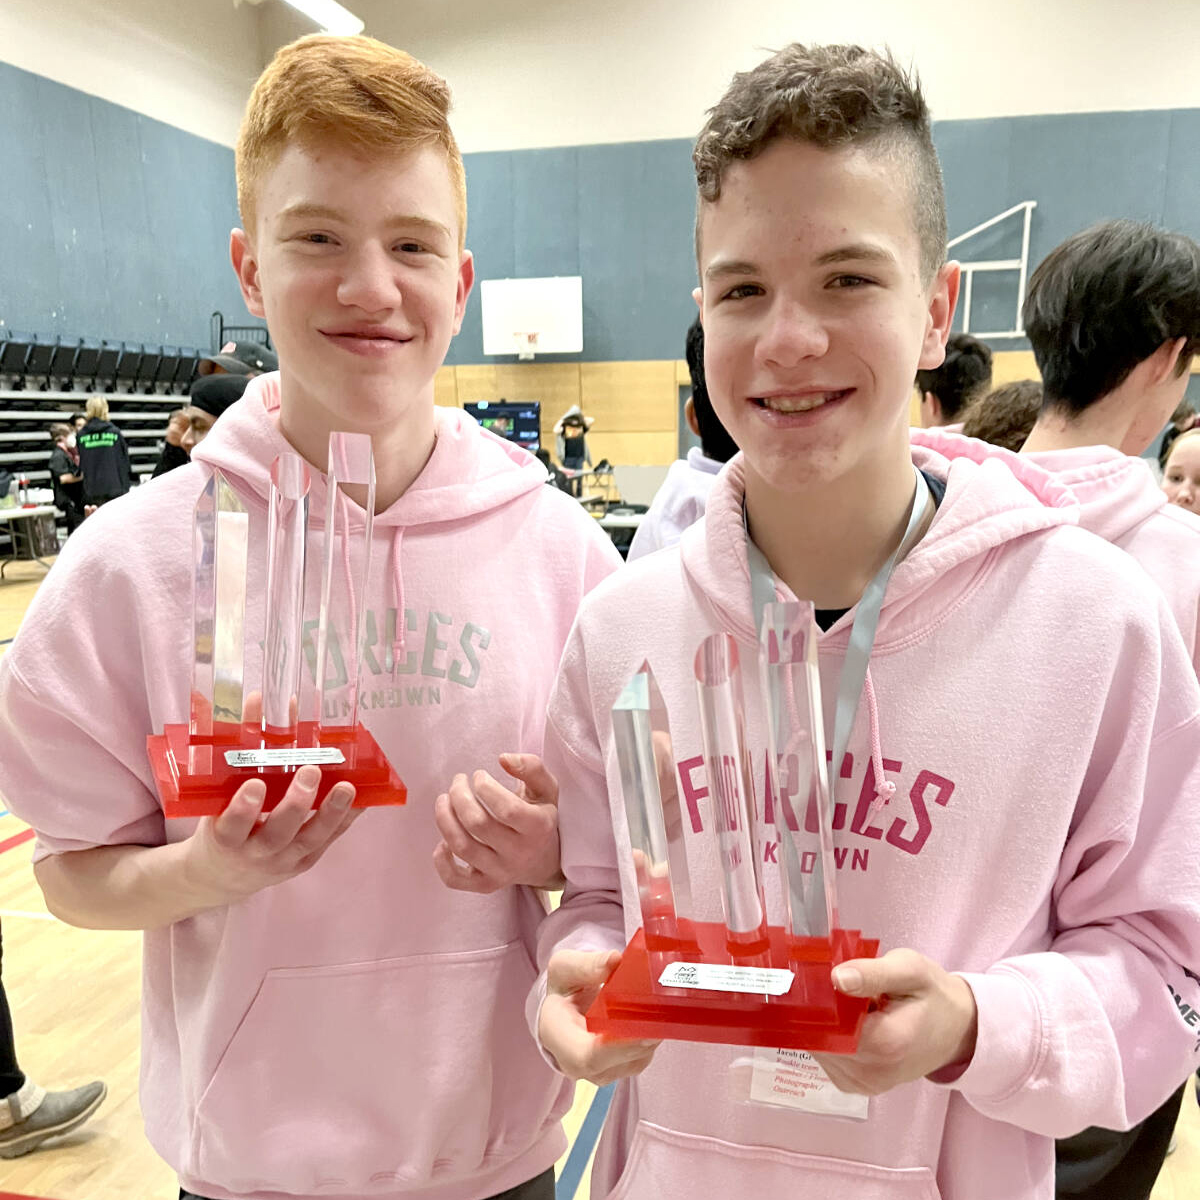 Two brothers from @MSSInfo are part of a team that’s taking on the world this week at world robotics championships in Texas! Read more about the St. Jean siblings in the Langley Advance-Times: ow.ly/bYwQ50NMfLK #MySD35Community